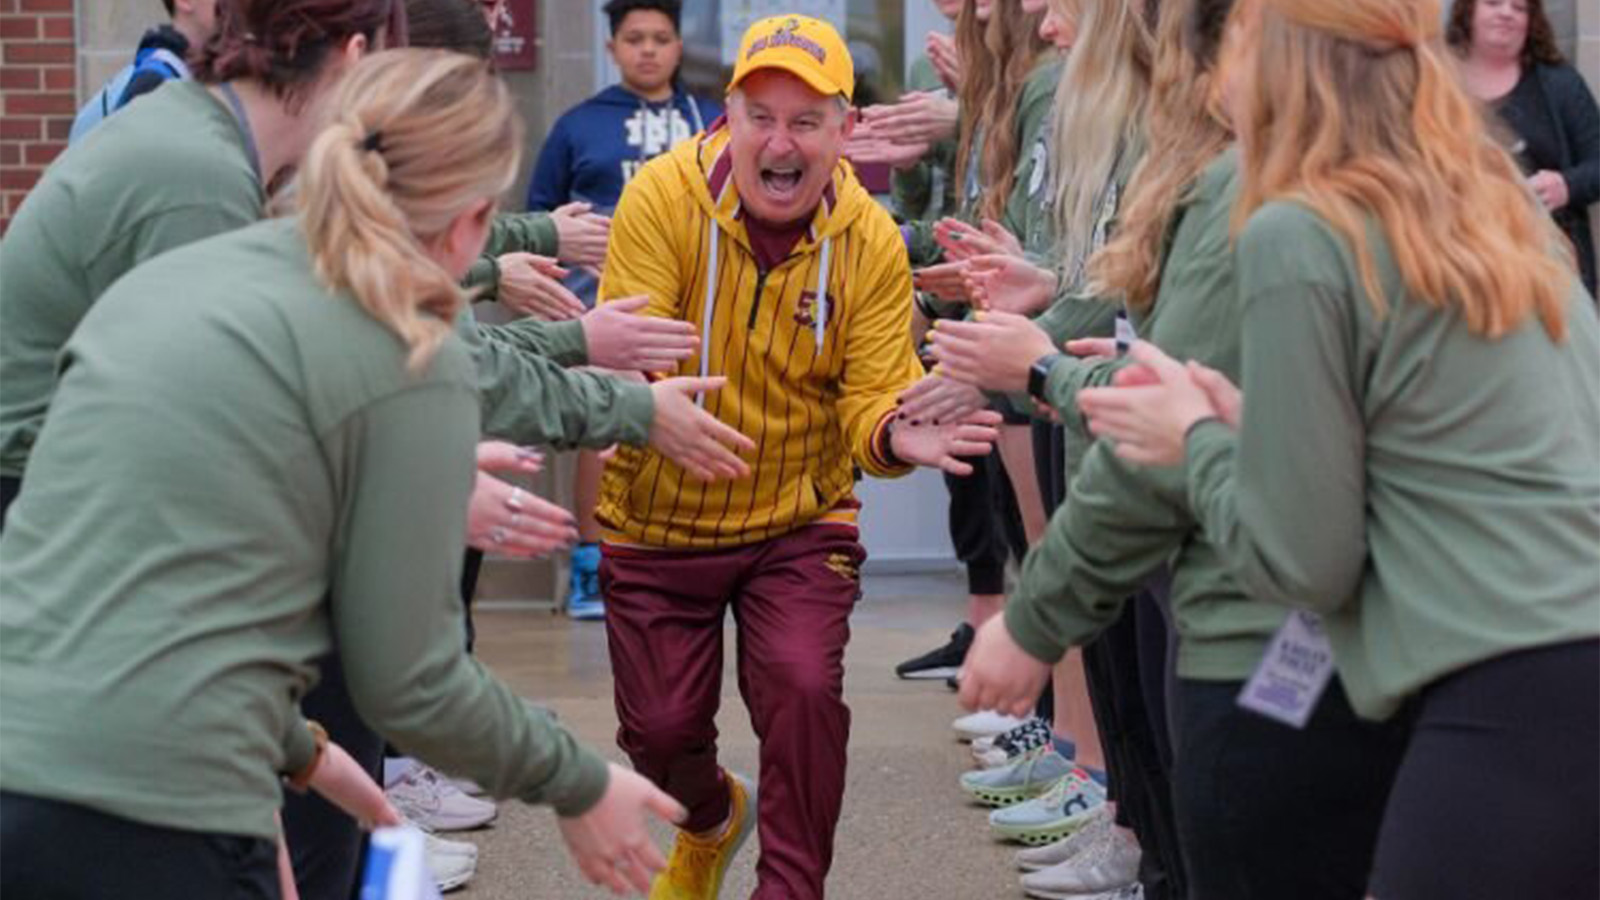 A man wearing a maroon and gold jumpsuit and ballcap happily gives high-fives while running through a human-formed tunnel of college students dressed in light green shirts.